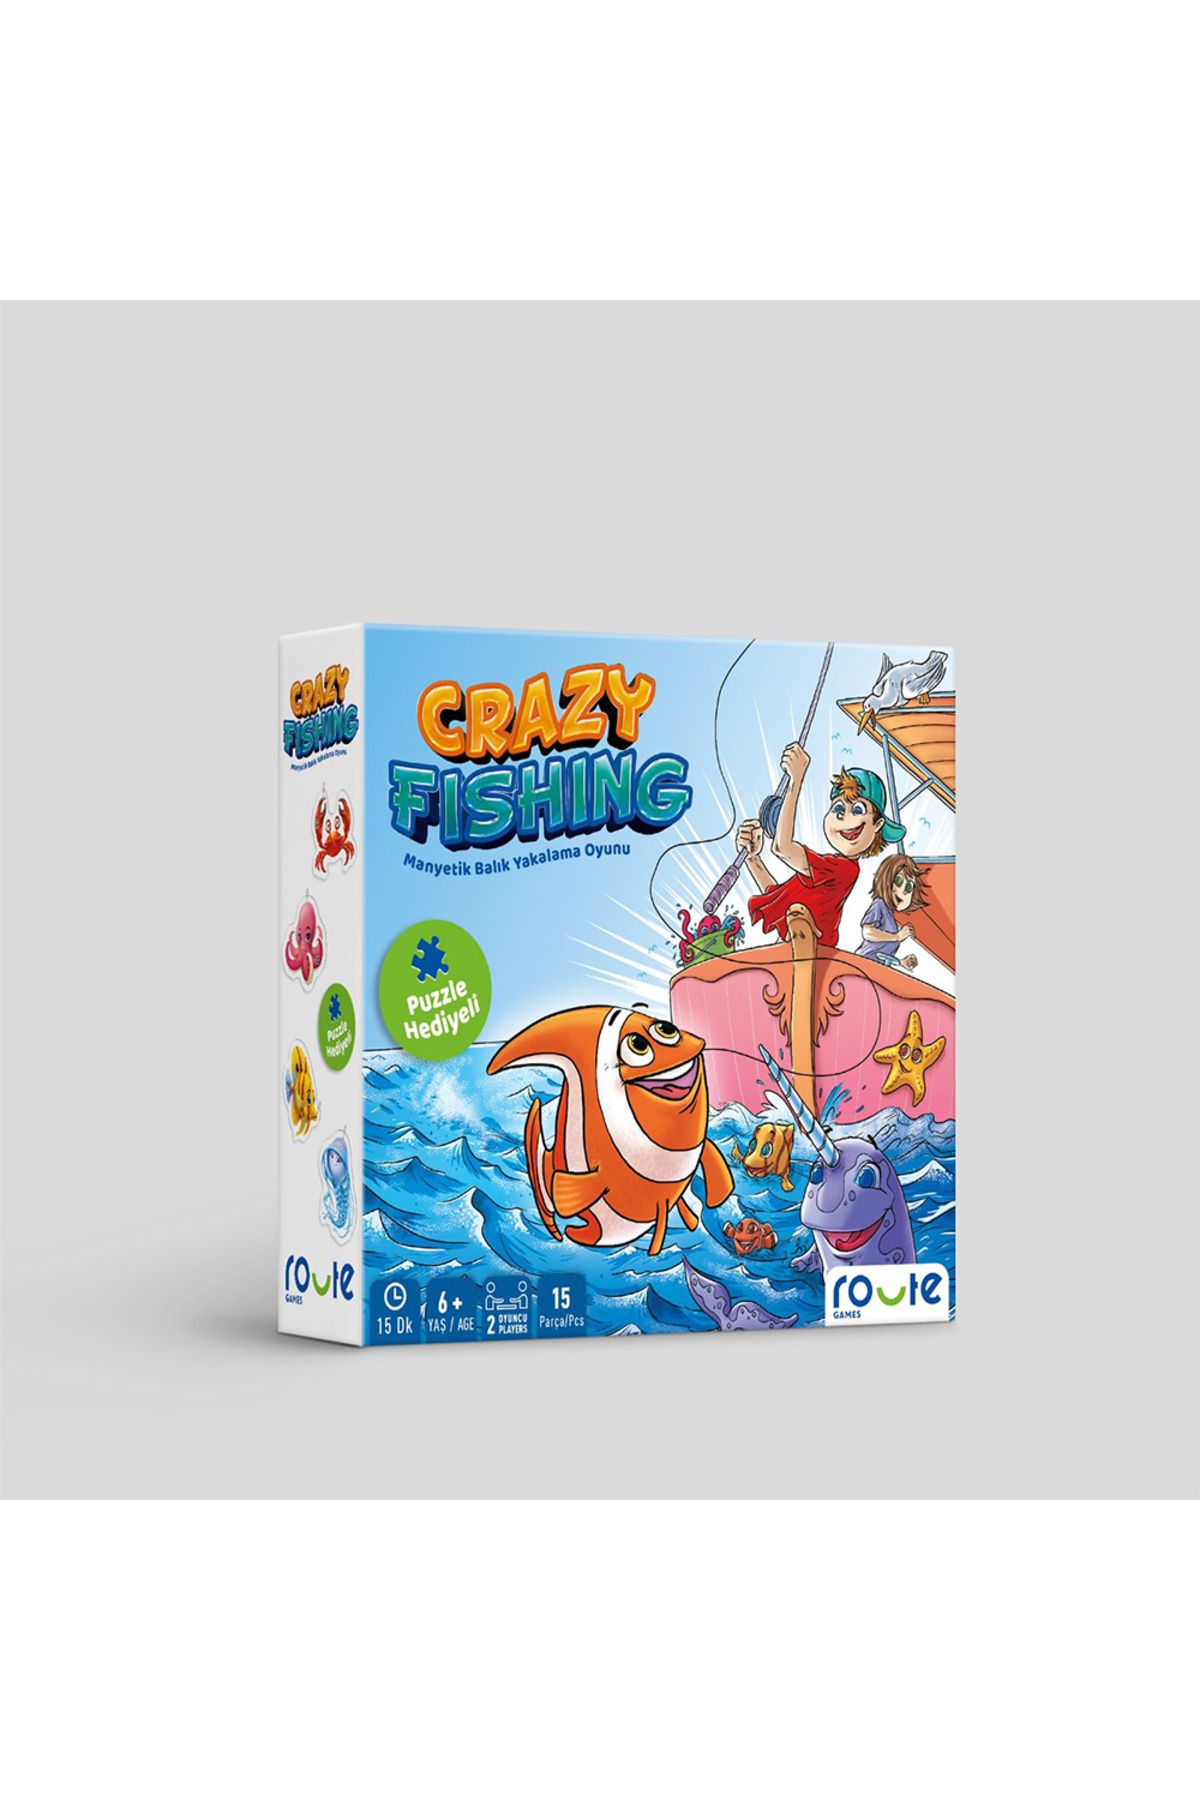 ROUTE Crazy Fishing - Crazy Fishing Educational Game